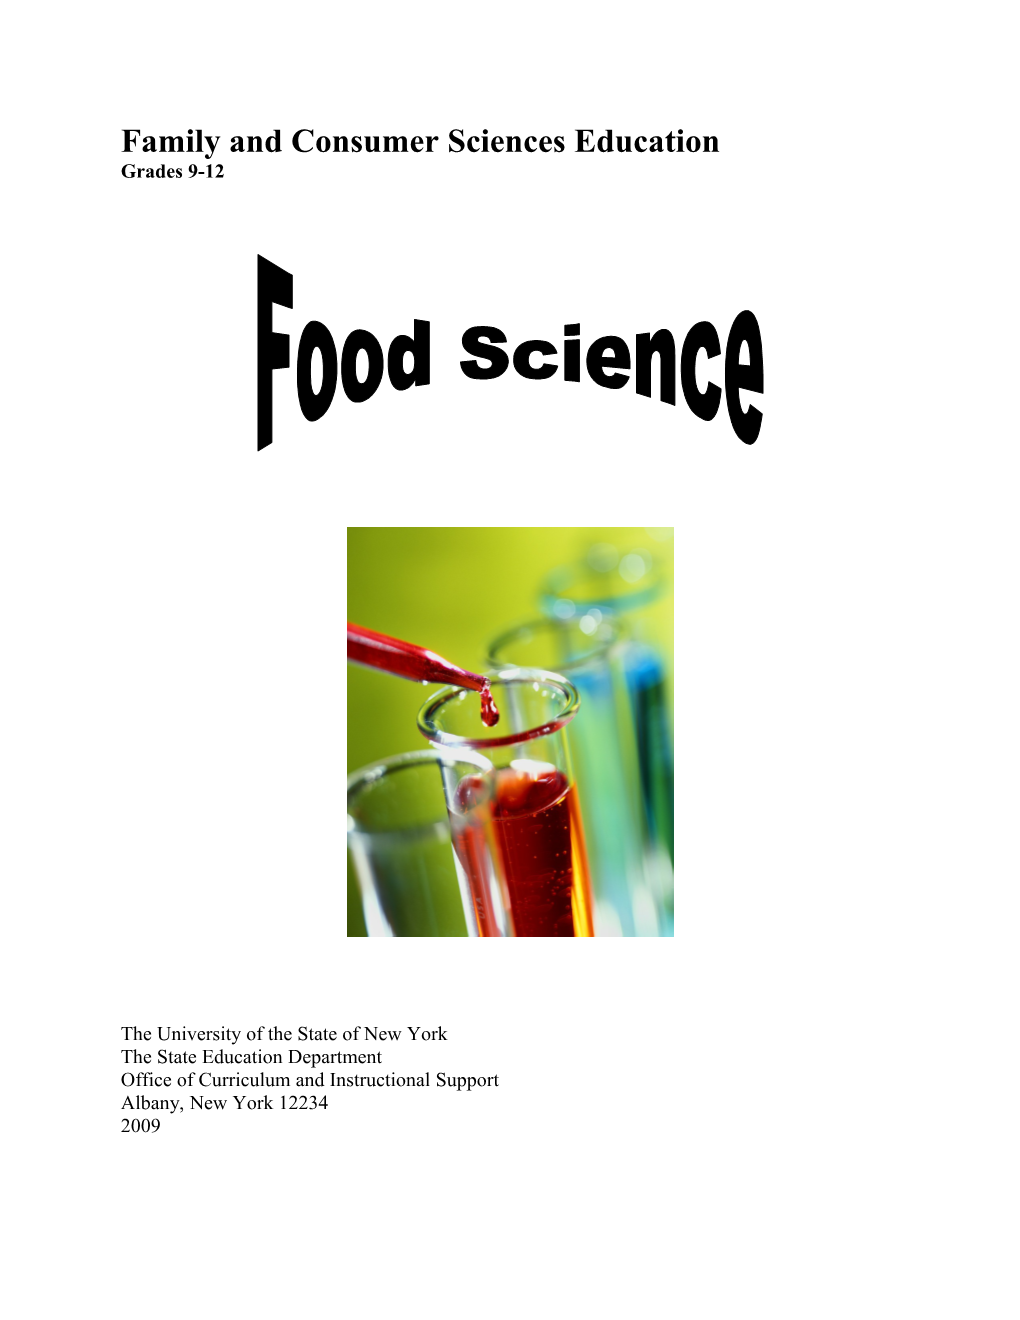 Course: Food Science